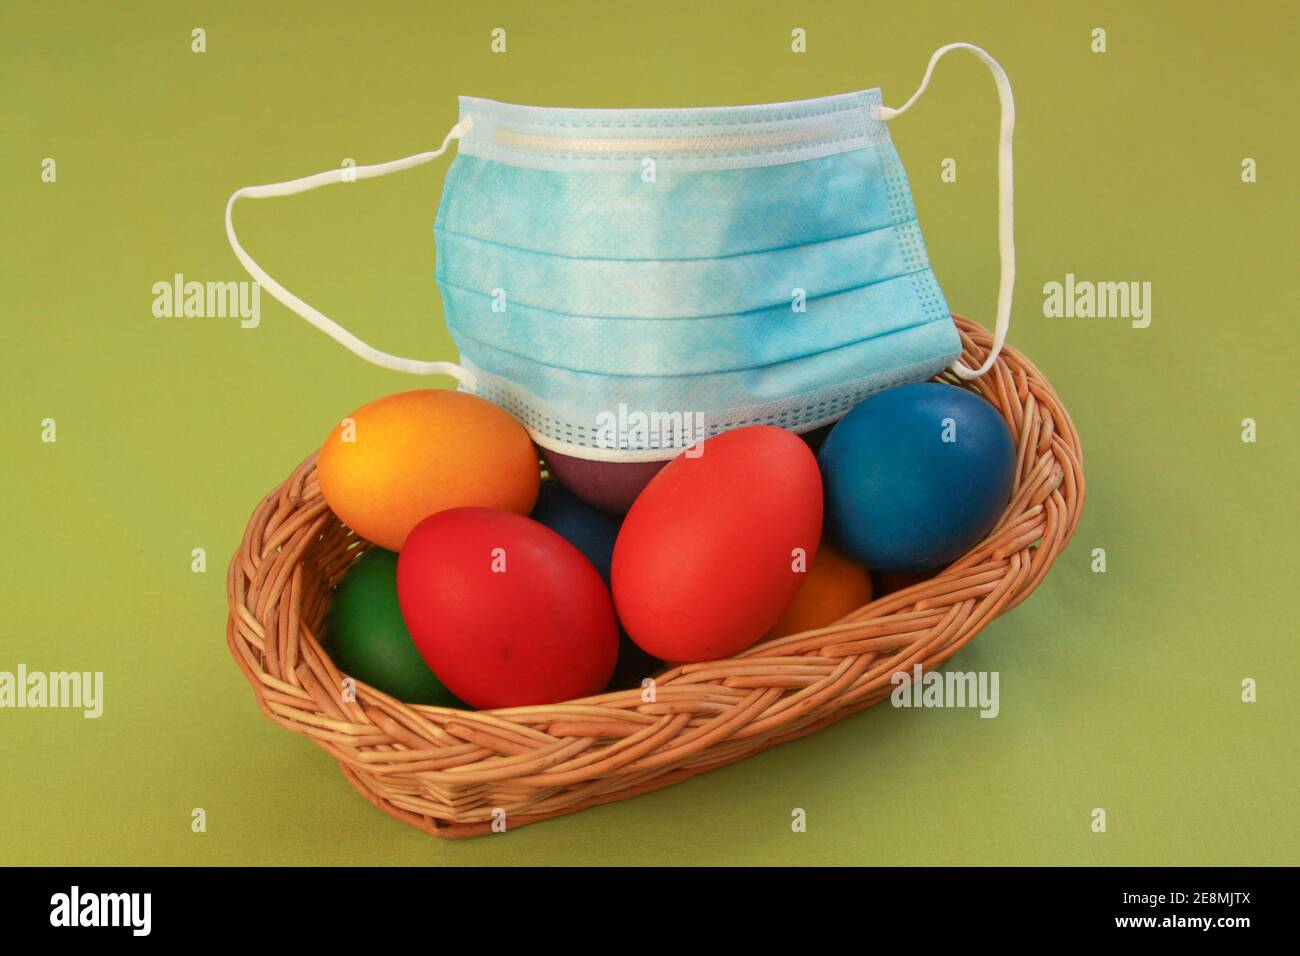 Isolated colored painted Easter eggs in wooden basket decoration with surgical mask, a symbol of coronavirus pandemic. Easter 2020 covid 19 outbreak c Stock Photo